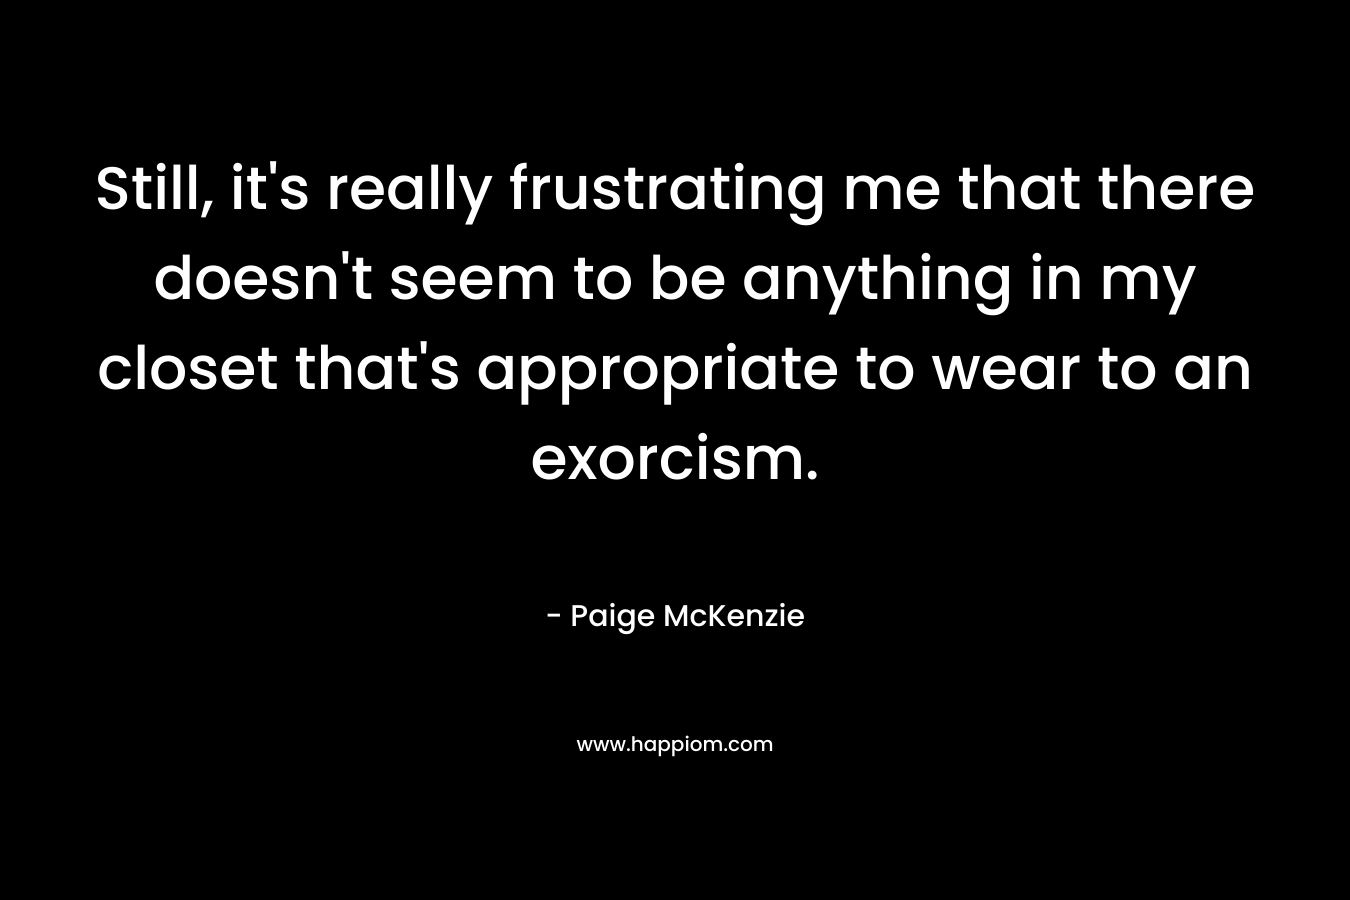 Still, it's really frustrating me that there doesn't seem to be anything in my closet that's appropriate to wear to an exorcism.